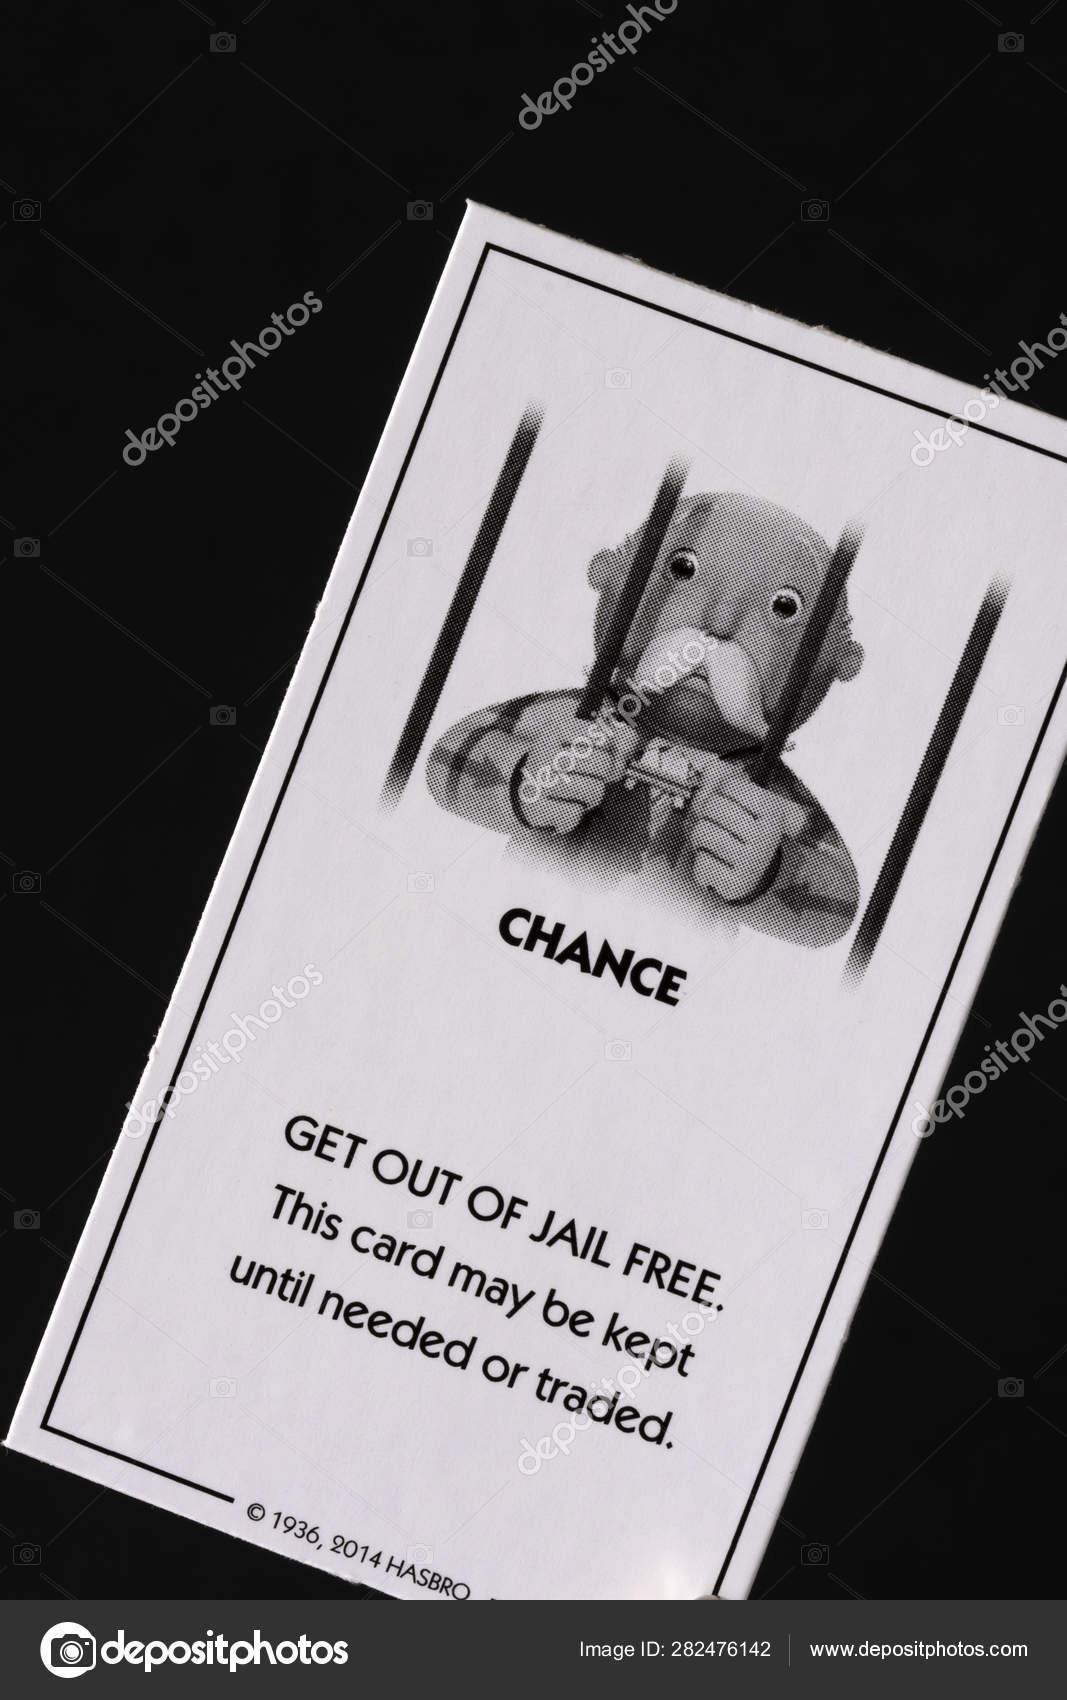 Customizable Get Out Of Jail Free Card Editable Template For Get Out Of Jail Free Card Template